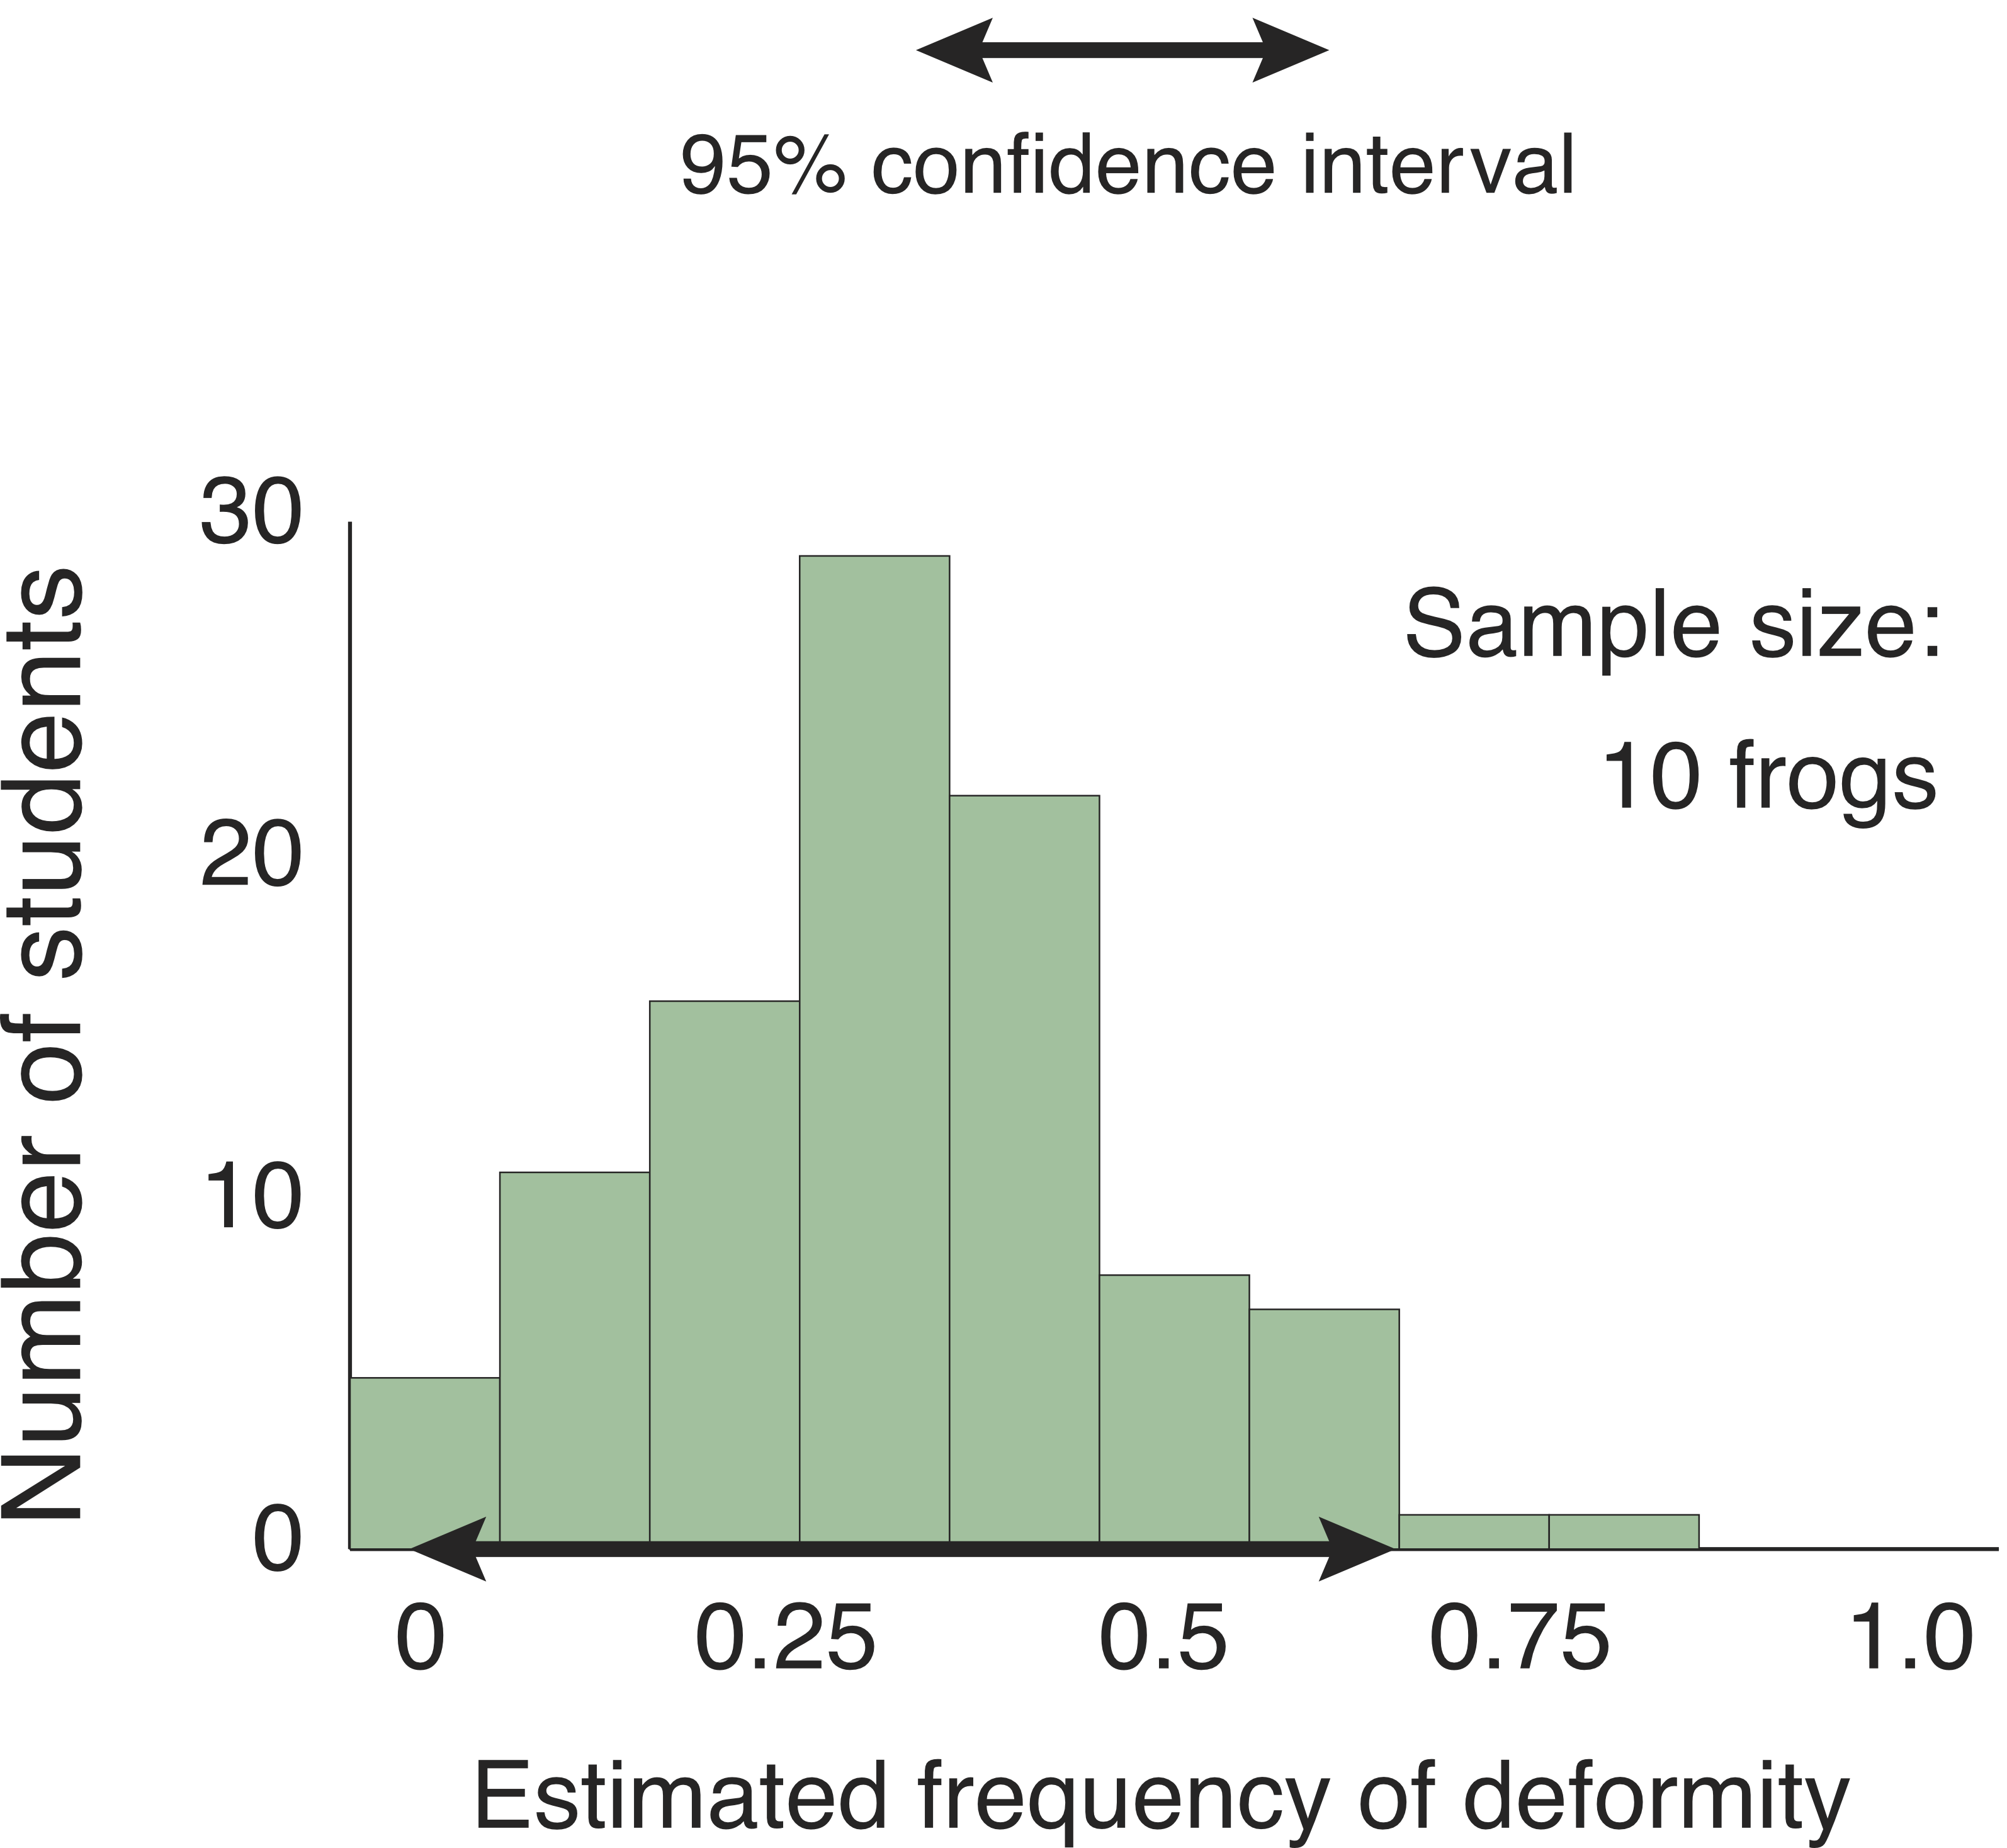 Histogram, labeled Sample size: 10 frogs. Vertical axis is Number of students, ranging from 0 to 30. Horizontal axis is Estimated frequency of deformity, ranging from 0 to 1. The bars show that most estimates were in the ballpark of 30%, but ranged from zero to 80%. A key indicates that the double headed black arrow on the horiztonal axis represents the 95% confidence interval. It ranges from 5% to 70%.